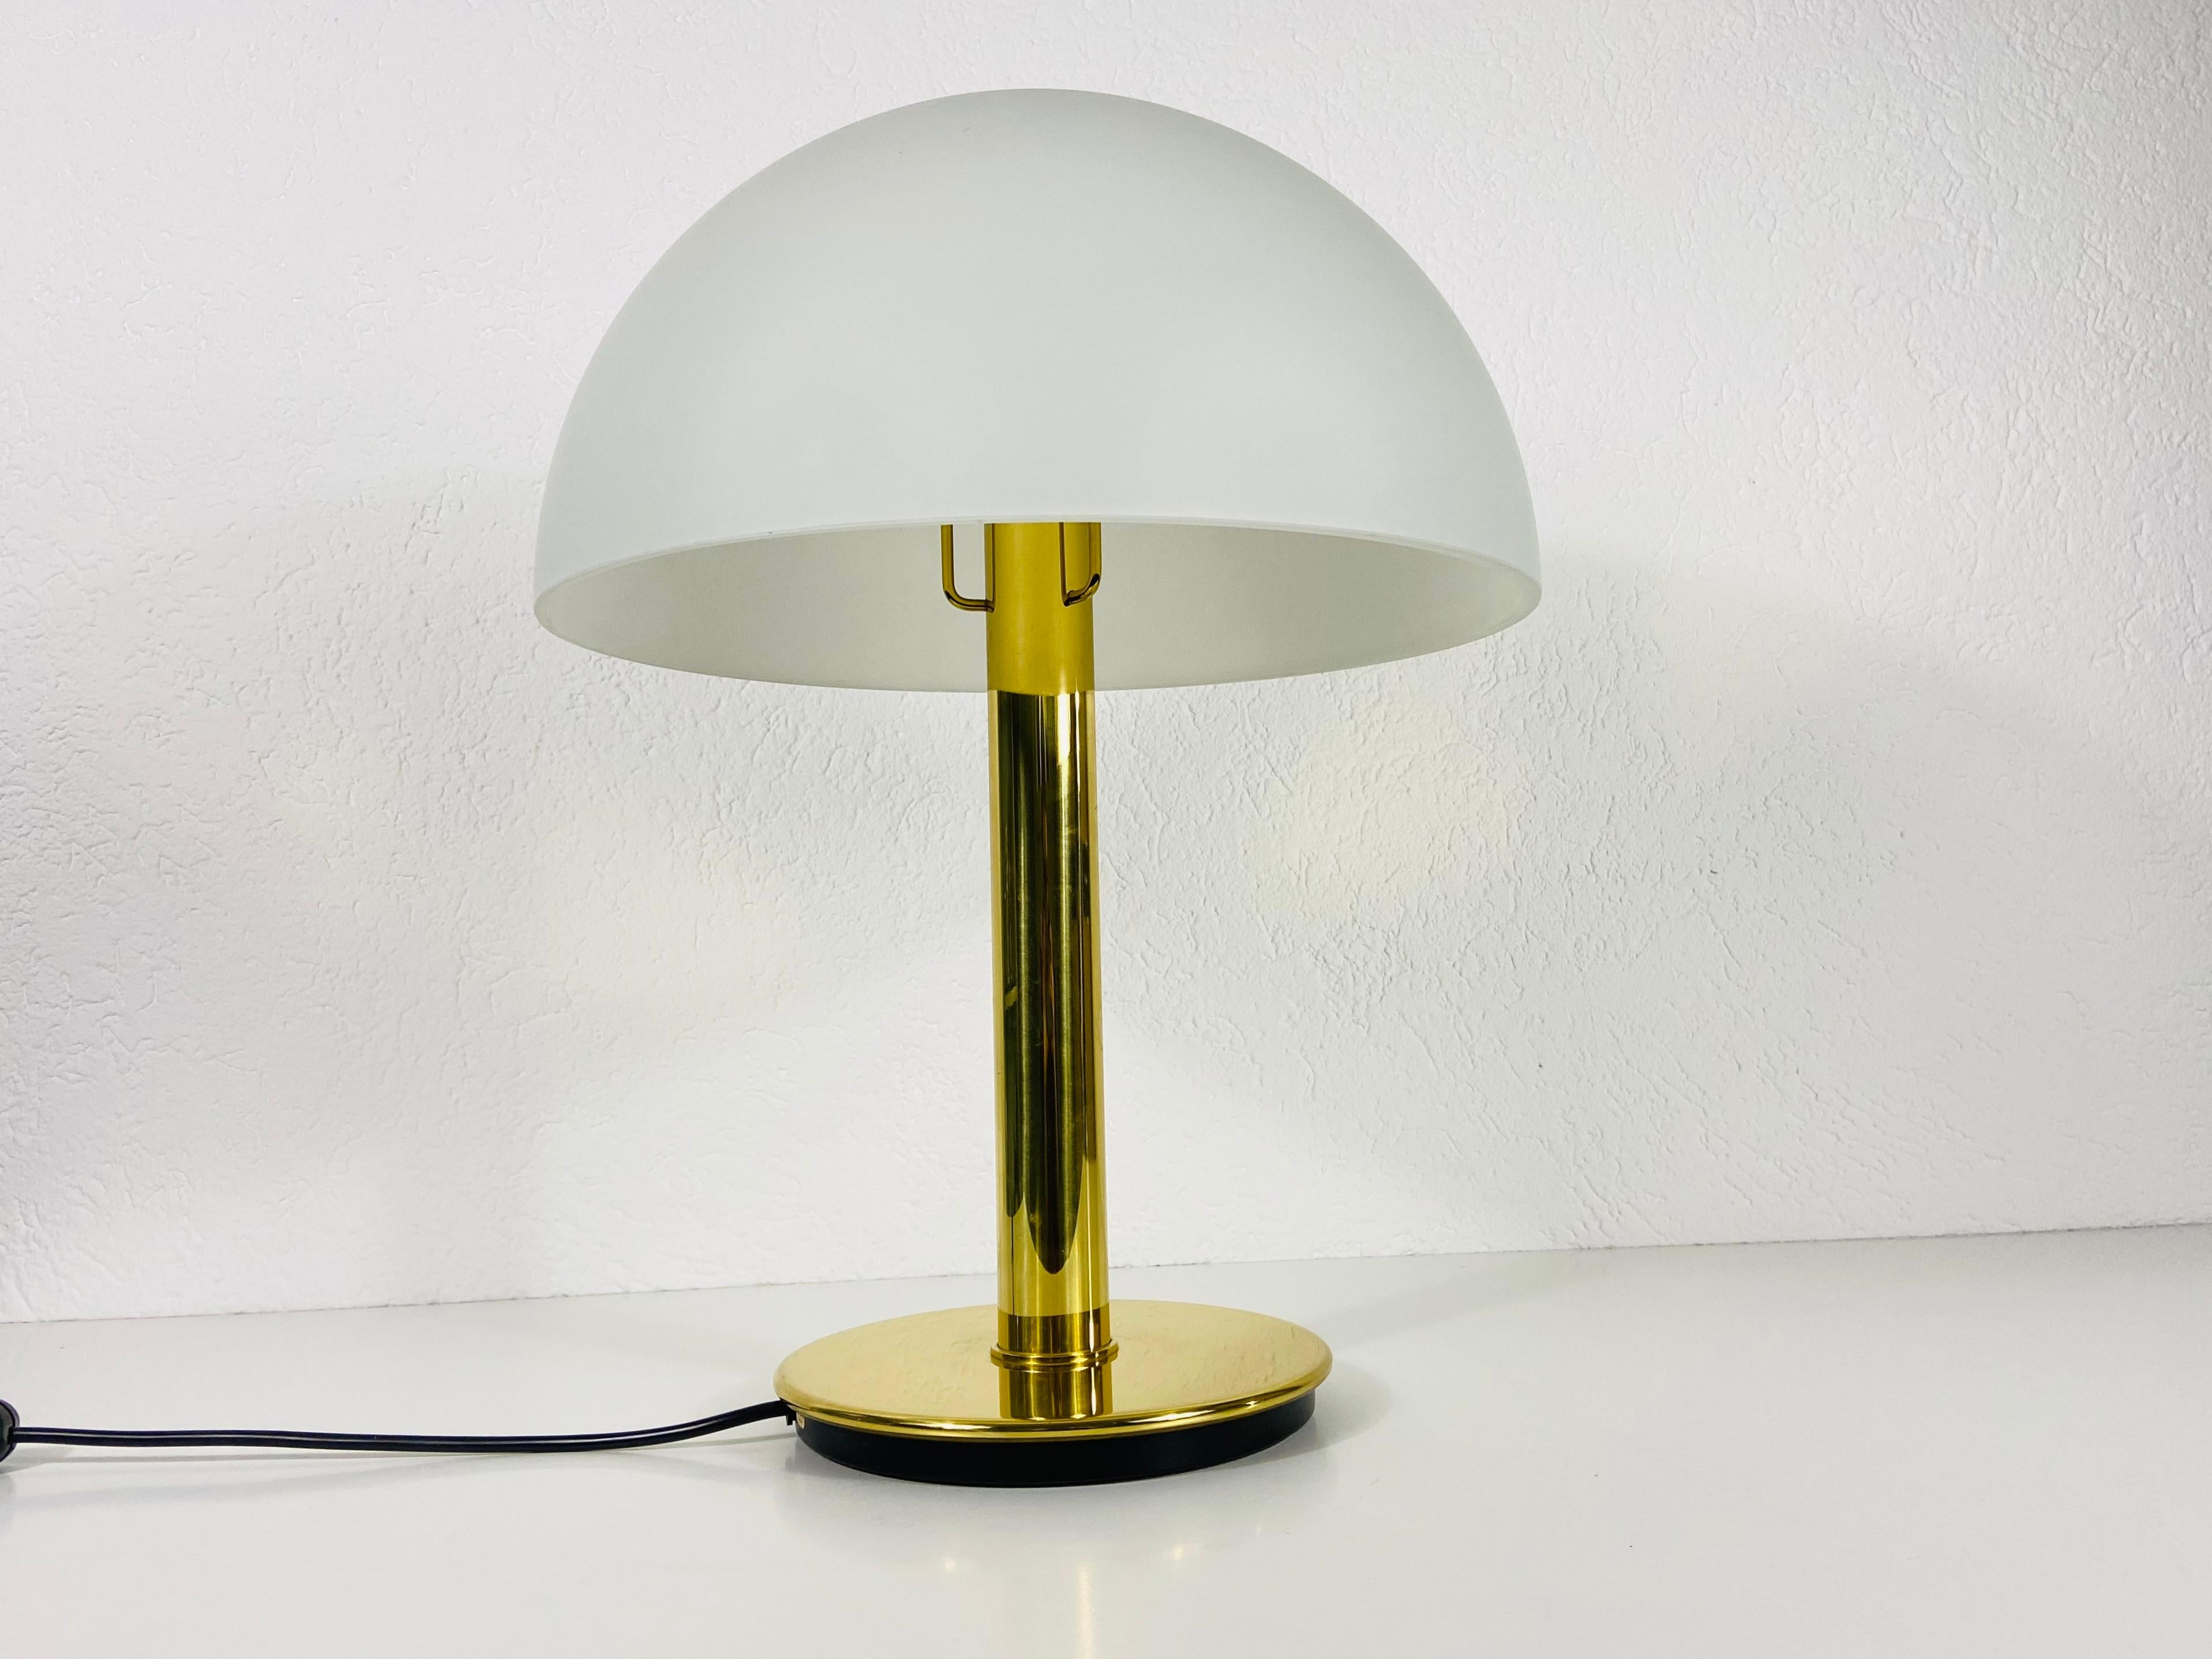 An German table lamp made in the 1960s. Made by solid brass.

The light requires one E27 light bulb. Good vintage condition.

Free worldwide shipping.